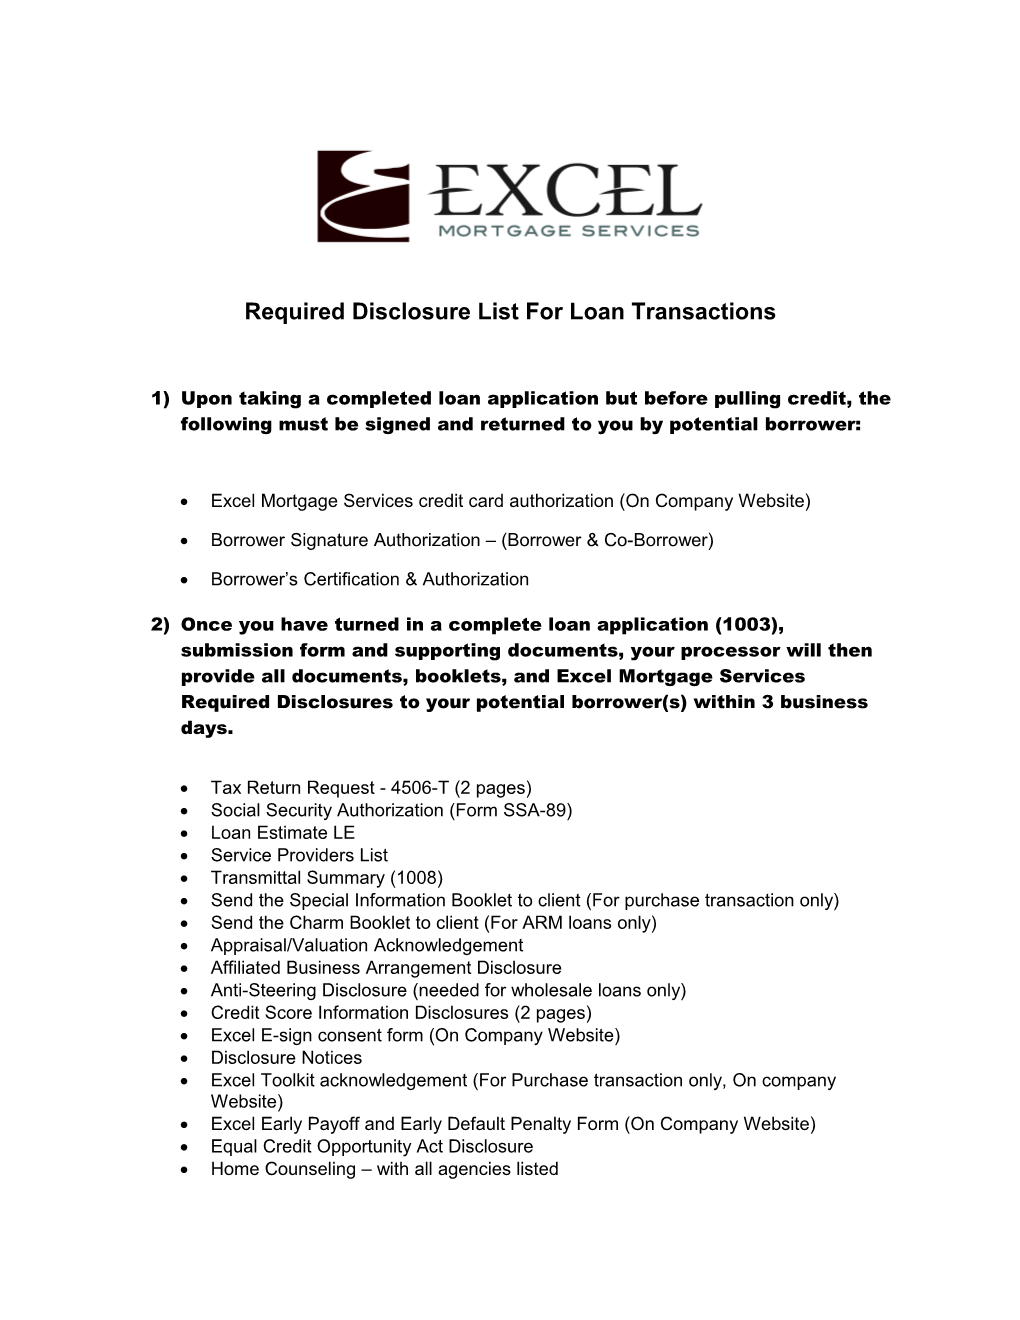 Required Disclosure List for Loan Transactions